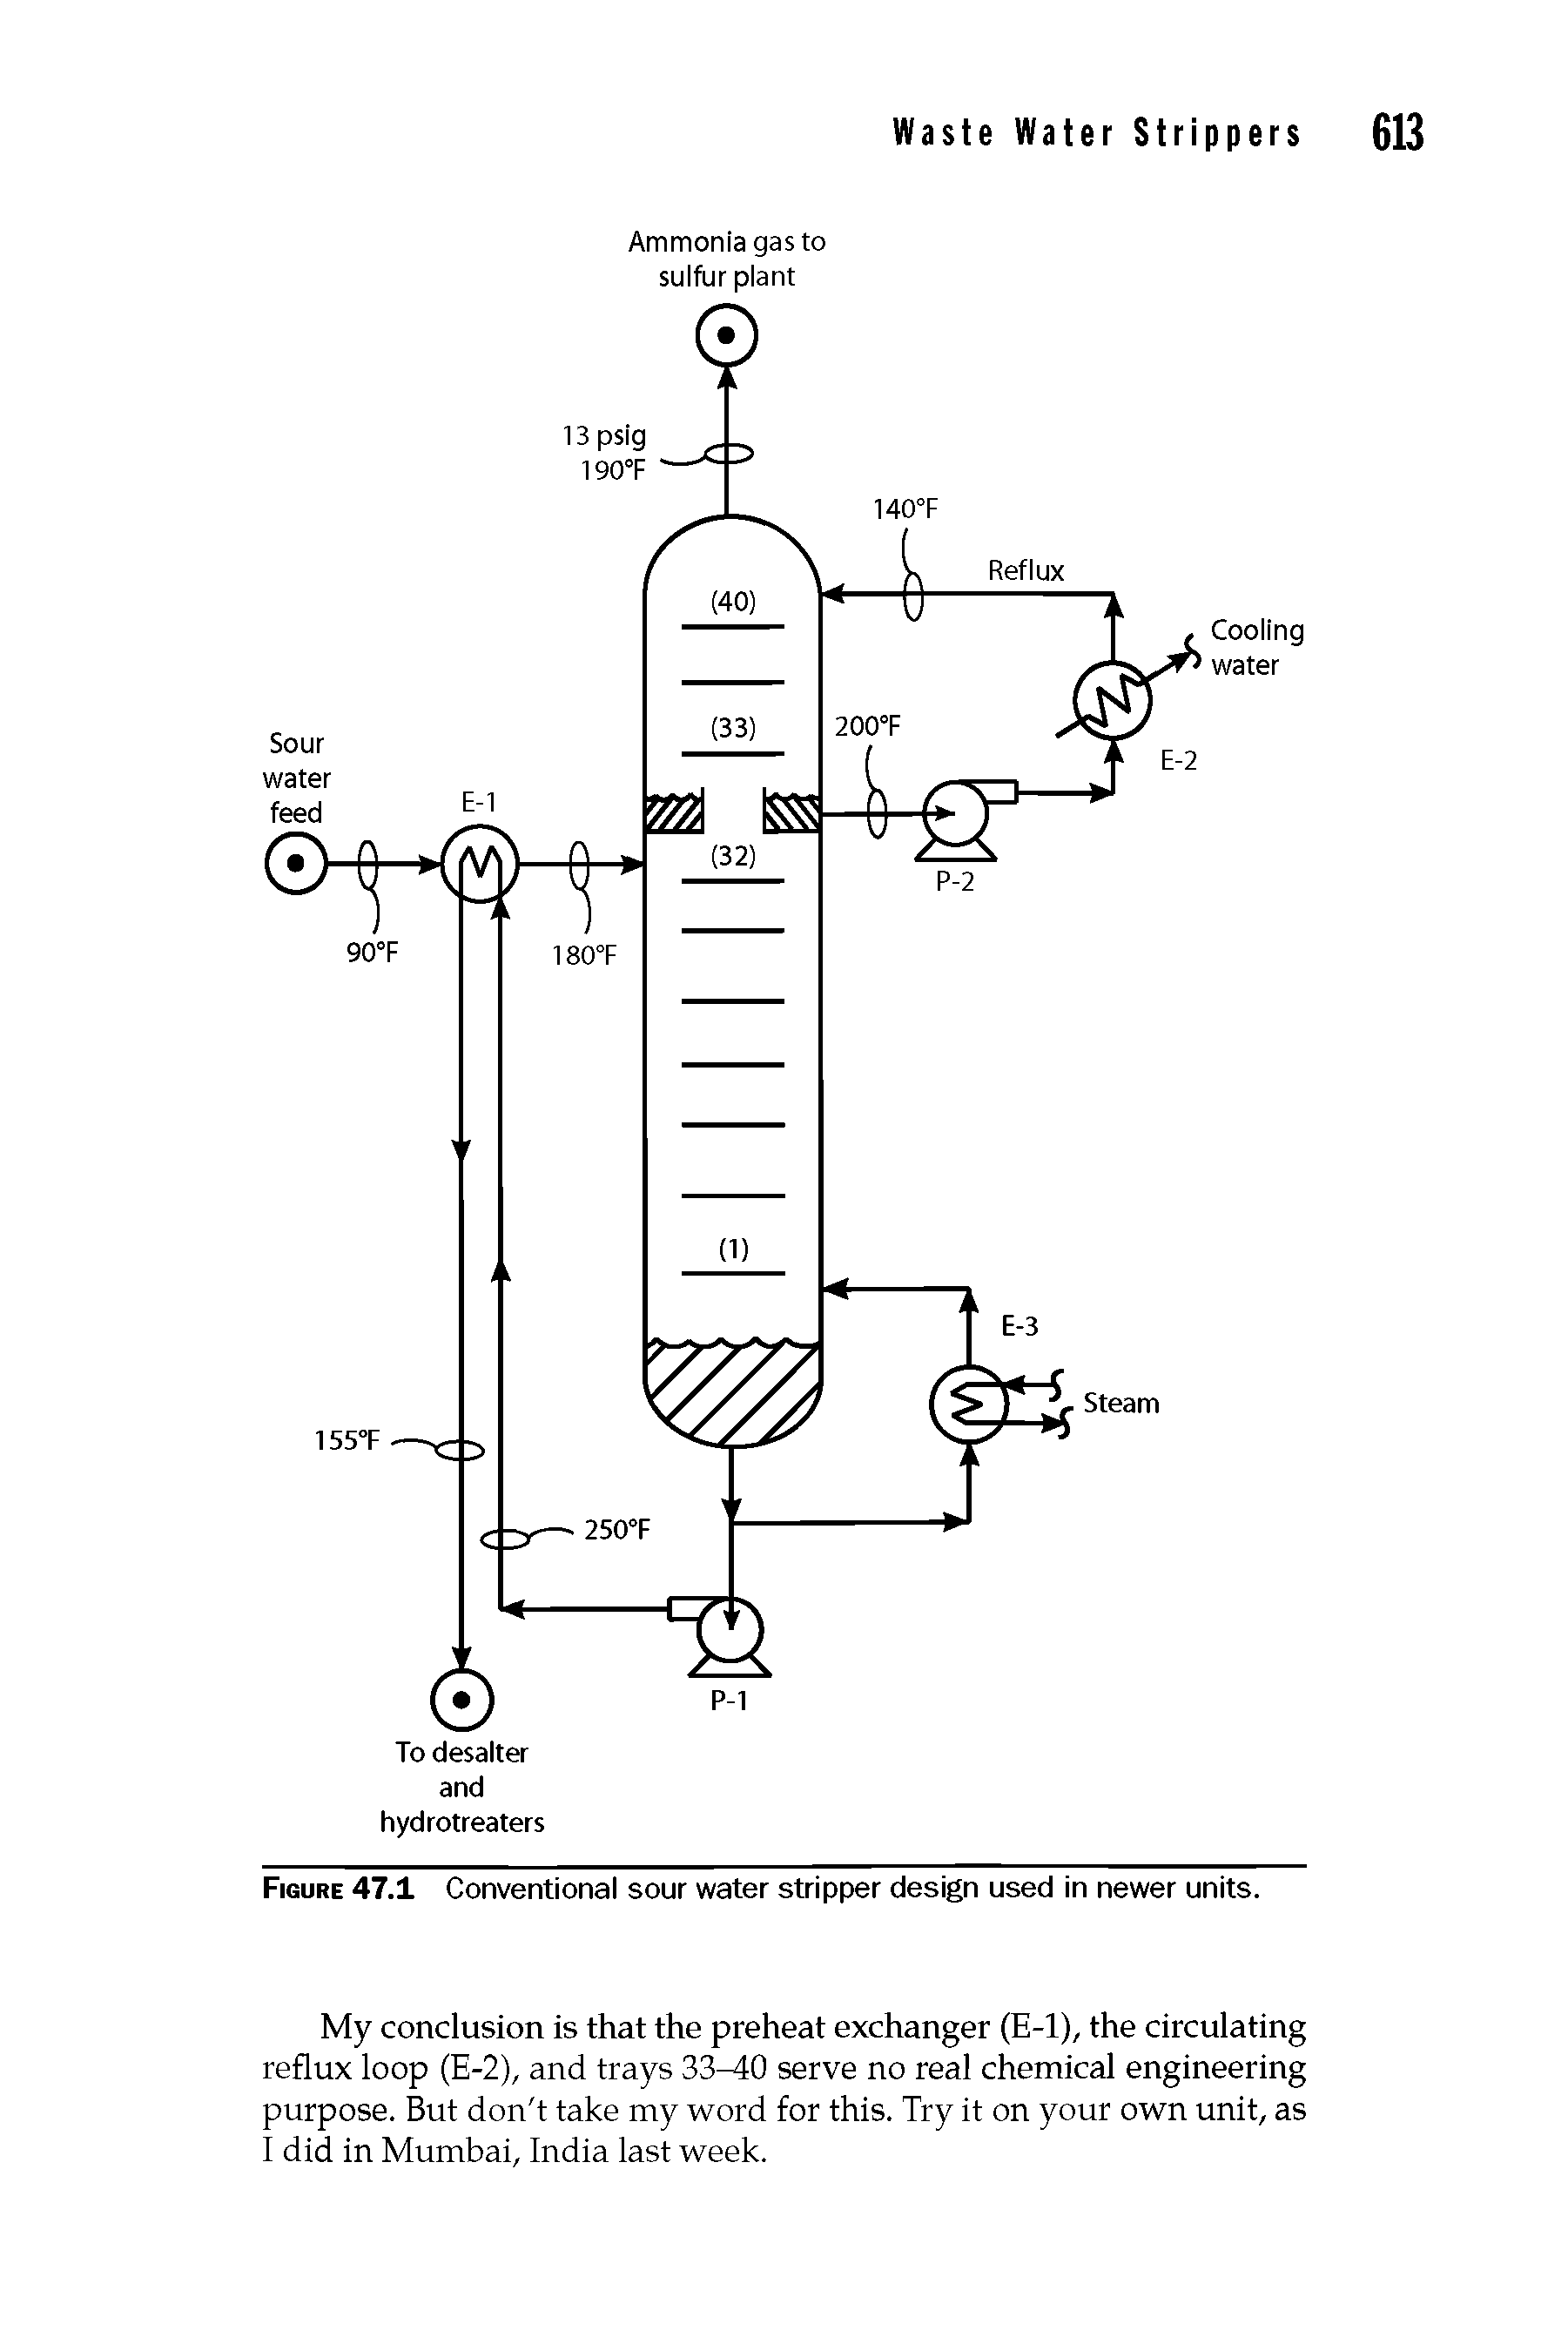 Figure 47.1 Conventional sour water stripper design used in newer units.